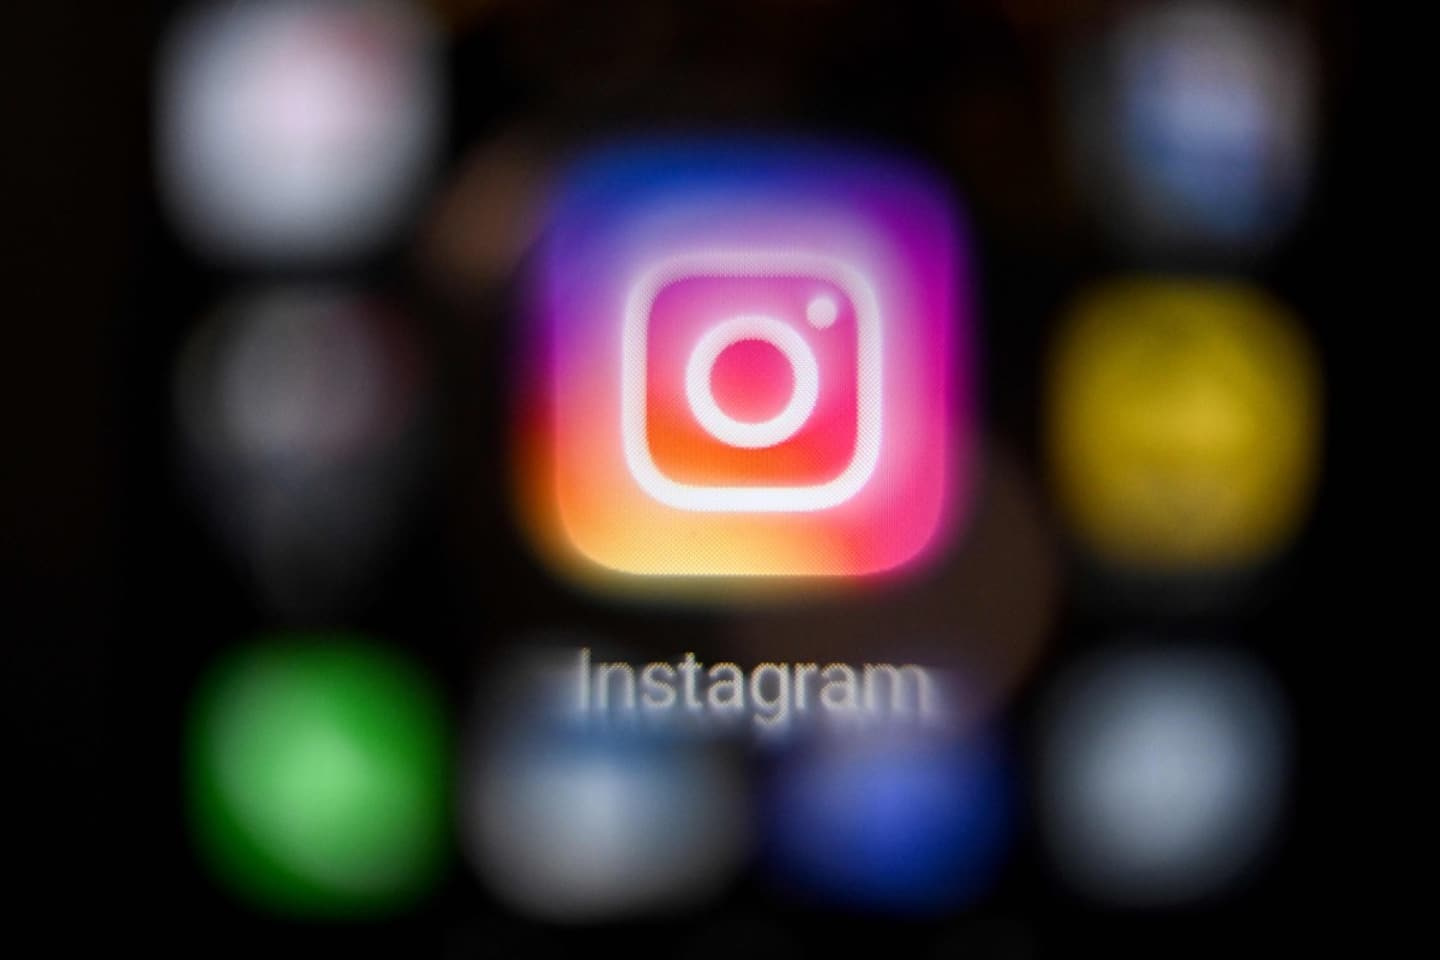 Instagram wants to give parents more tools to monitor their children's accounts